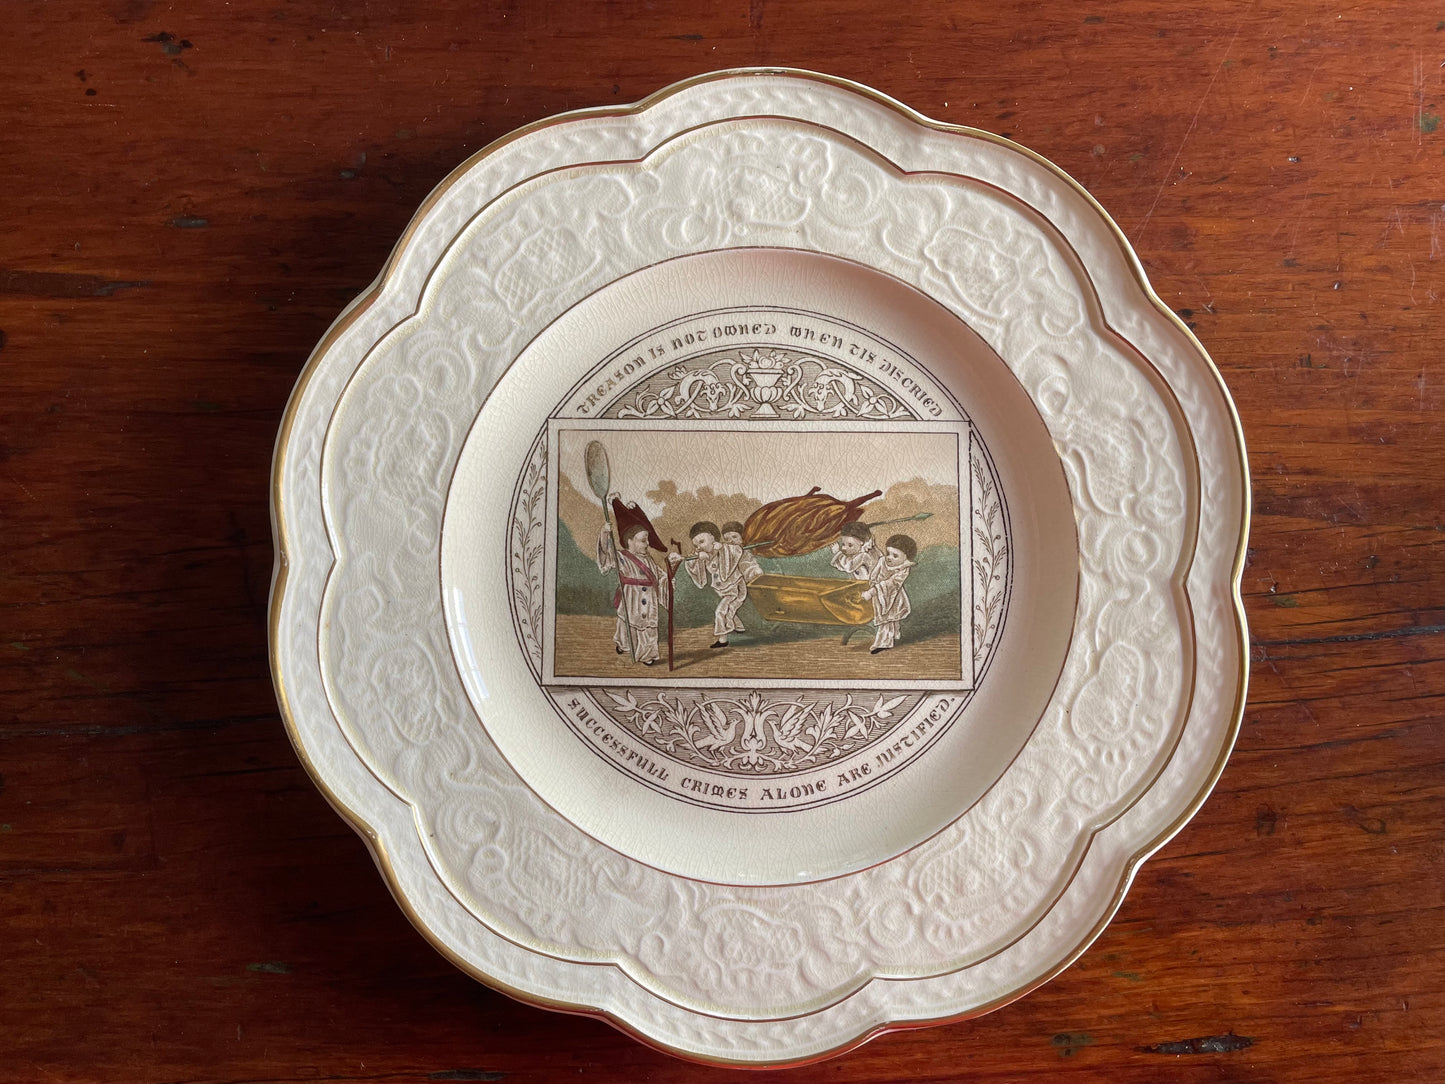 Wedgwood "Gastronomic Homilies" Card Motto Series Plate c. 1877 - "Treason is not owned when 'tis discried, successfull crimes are justified."